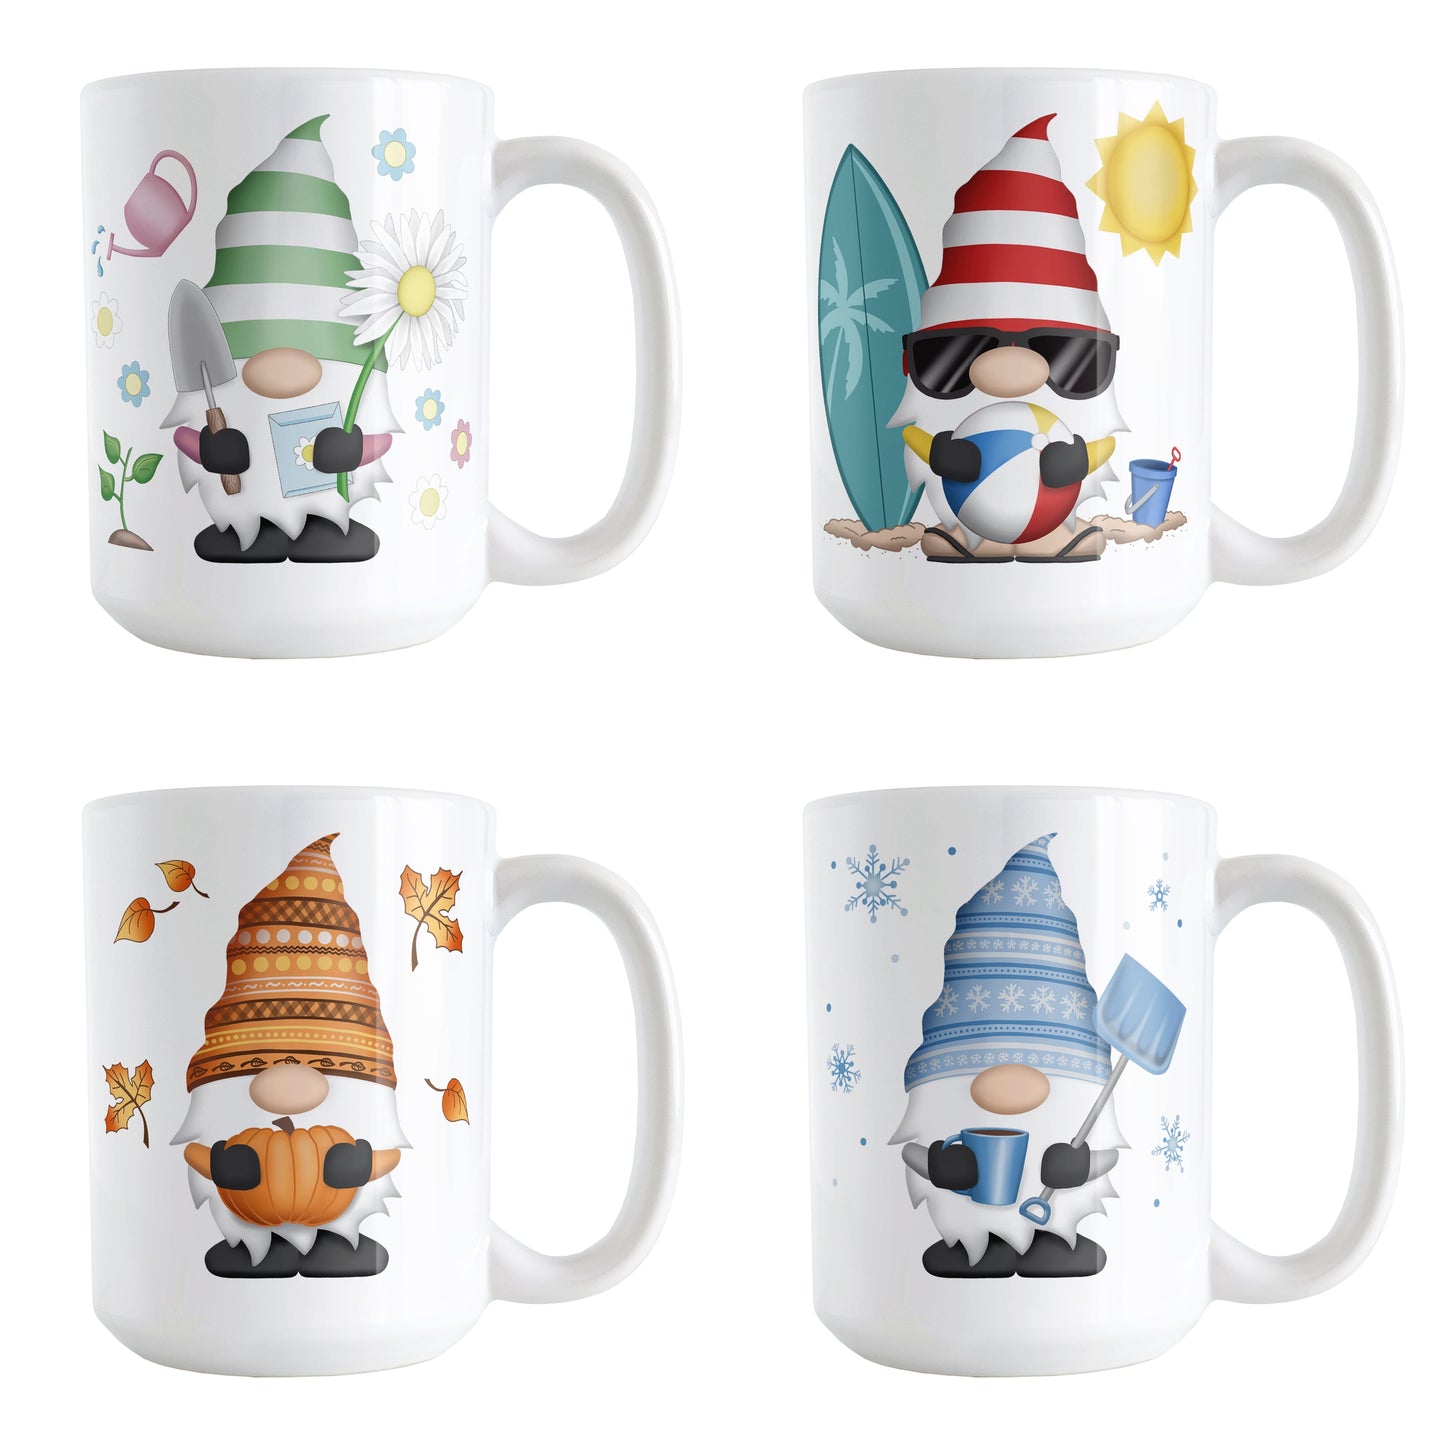 Set of 4 Seasonal Gnome Mugs (15oz) designed and illustrated with different seasonal themes including spring, summer, fall, and winter. Gnome mug gift set.